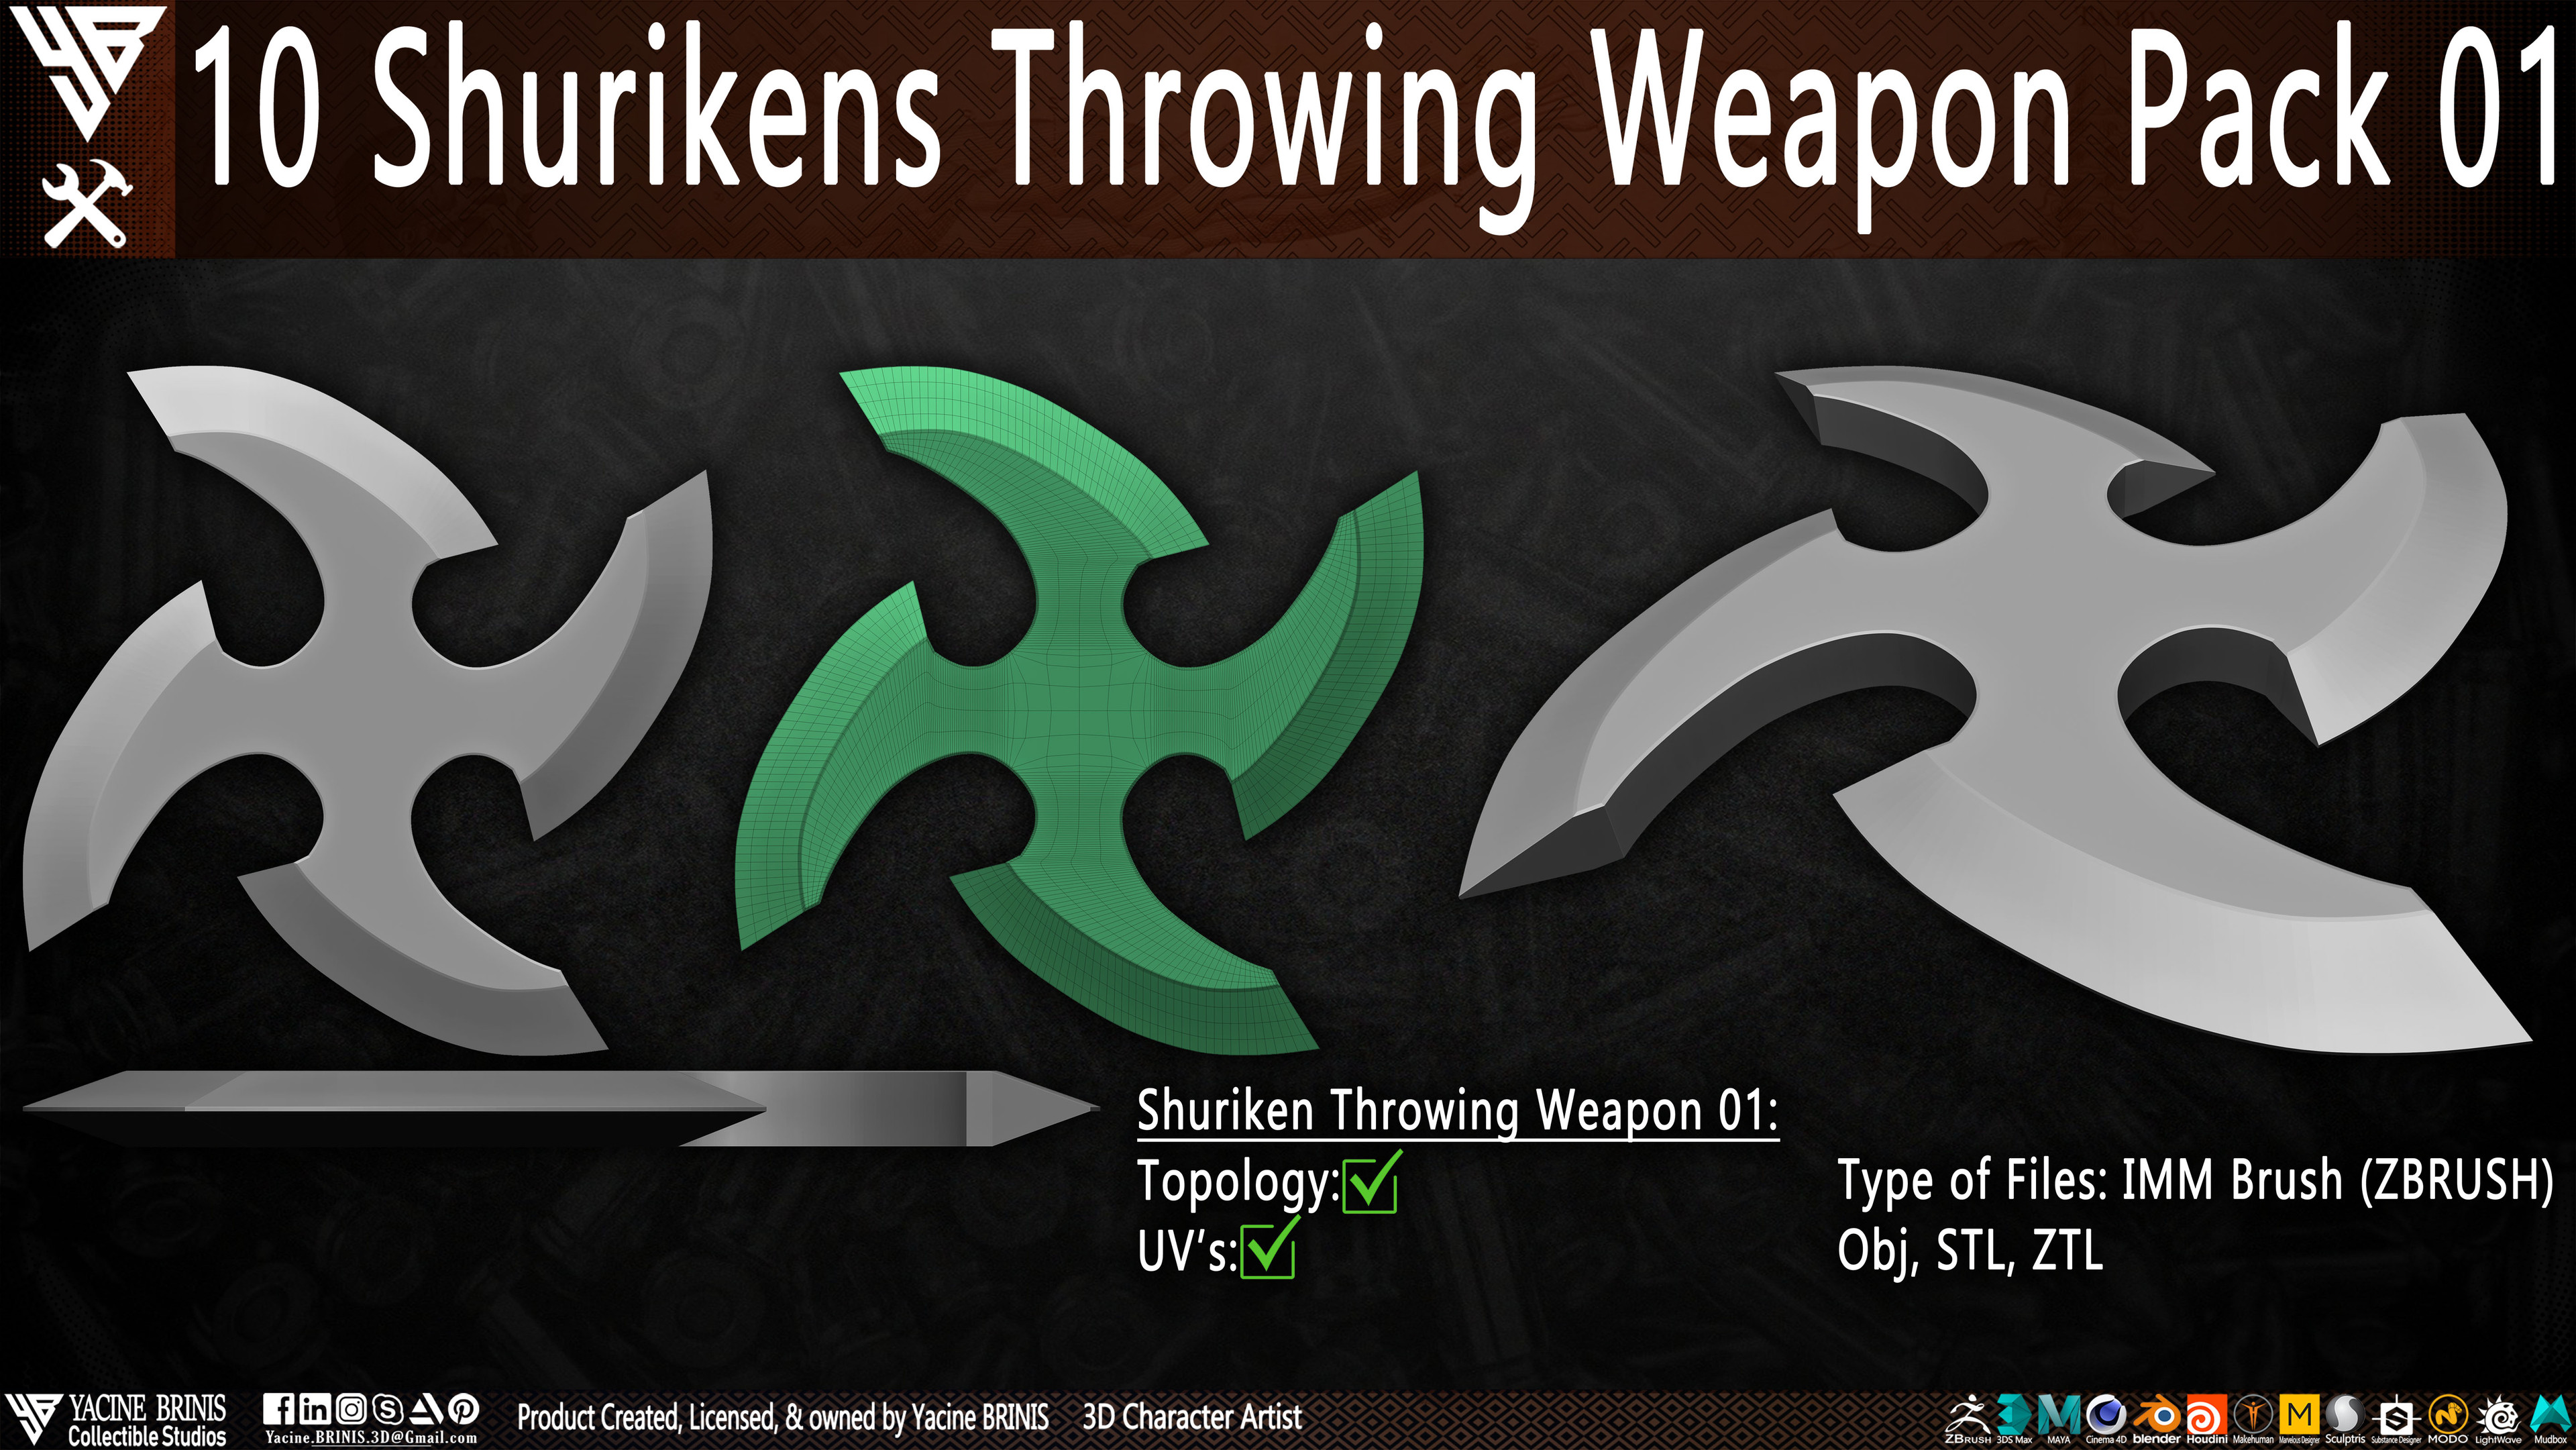 10 Shurikens Throwing Weapon Pack 01 sculpted by Yacine BRINIS Set 05